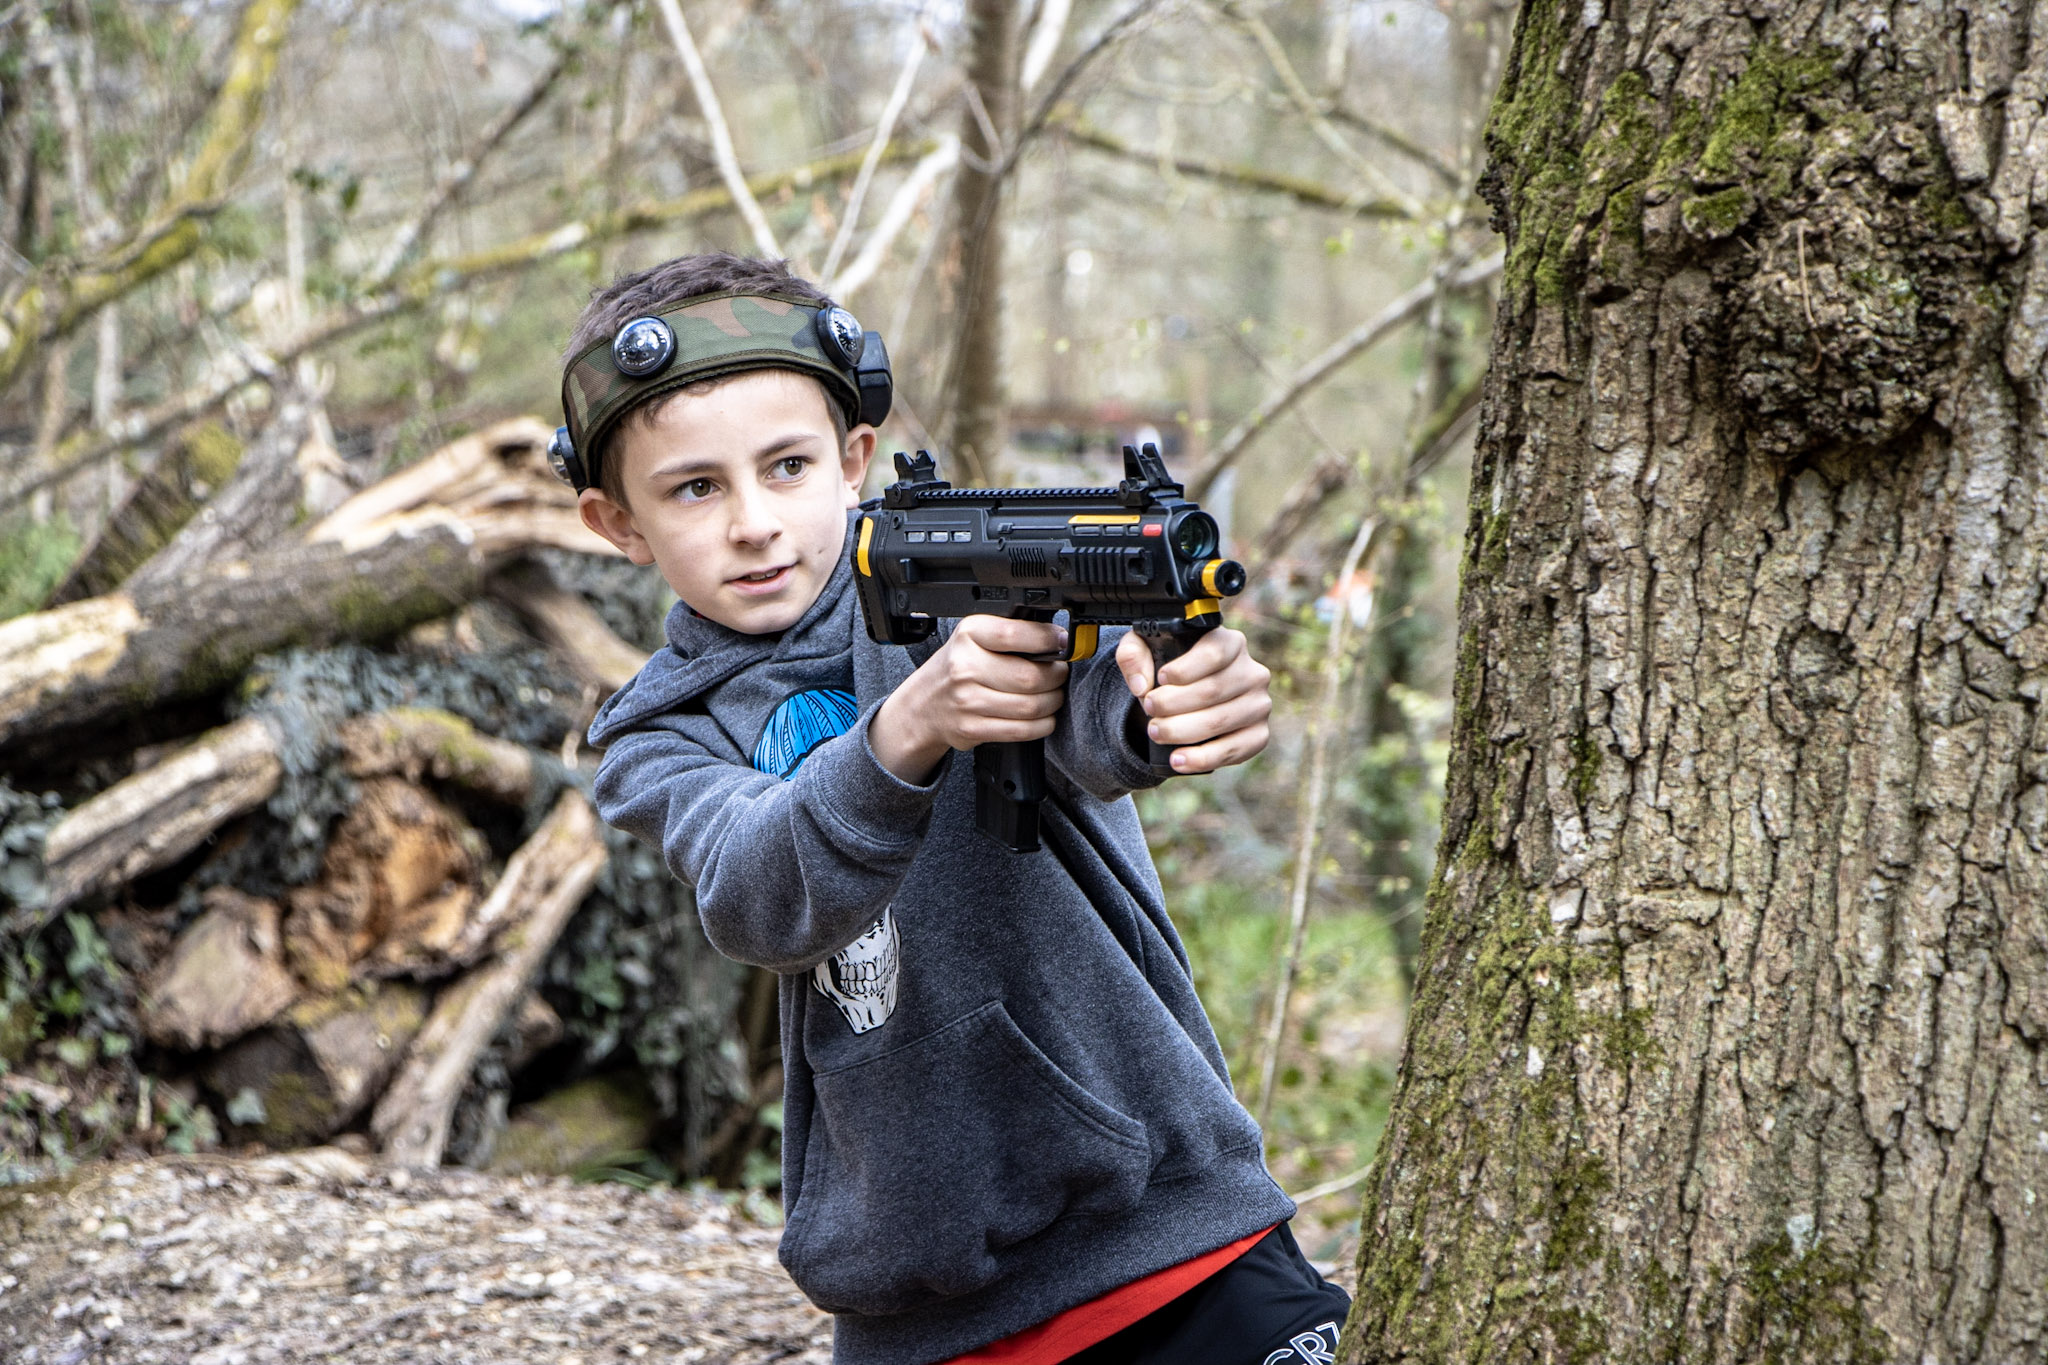 A boy taking part in BattleZone laser tag with his family